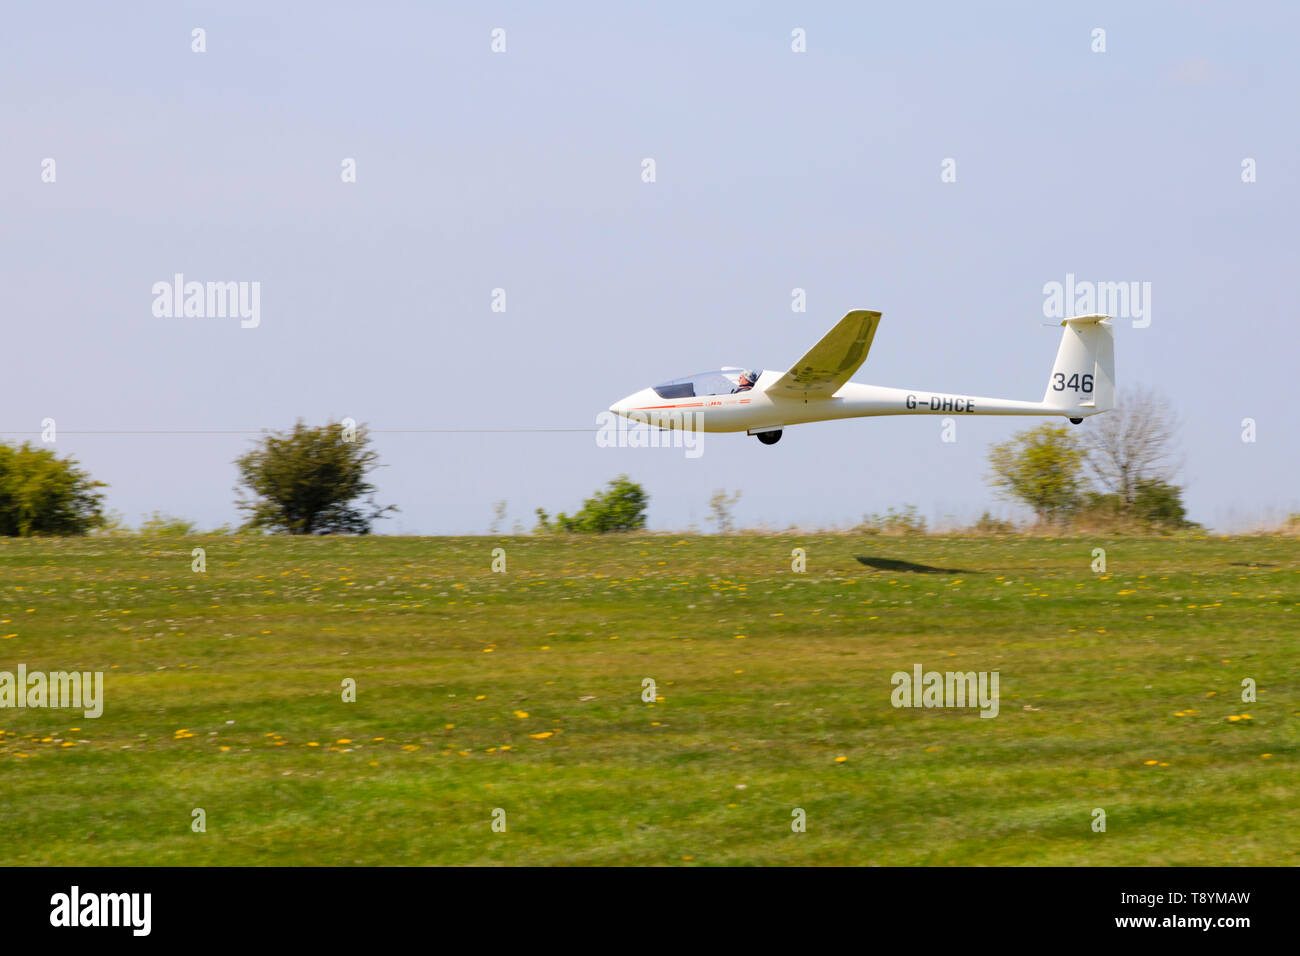 Alexander Schleicher ASW19b glider launching on aerotow, Yorkshire Gliding Club airfield at Sutton Bank in the North Yorkshire Moors National Park. Stock Photo